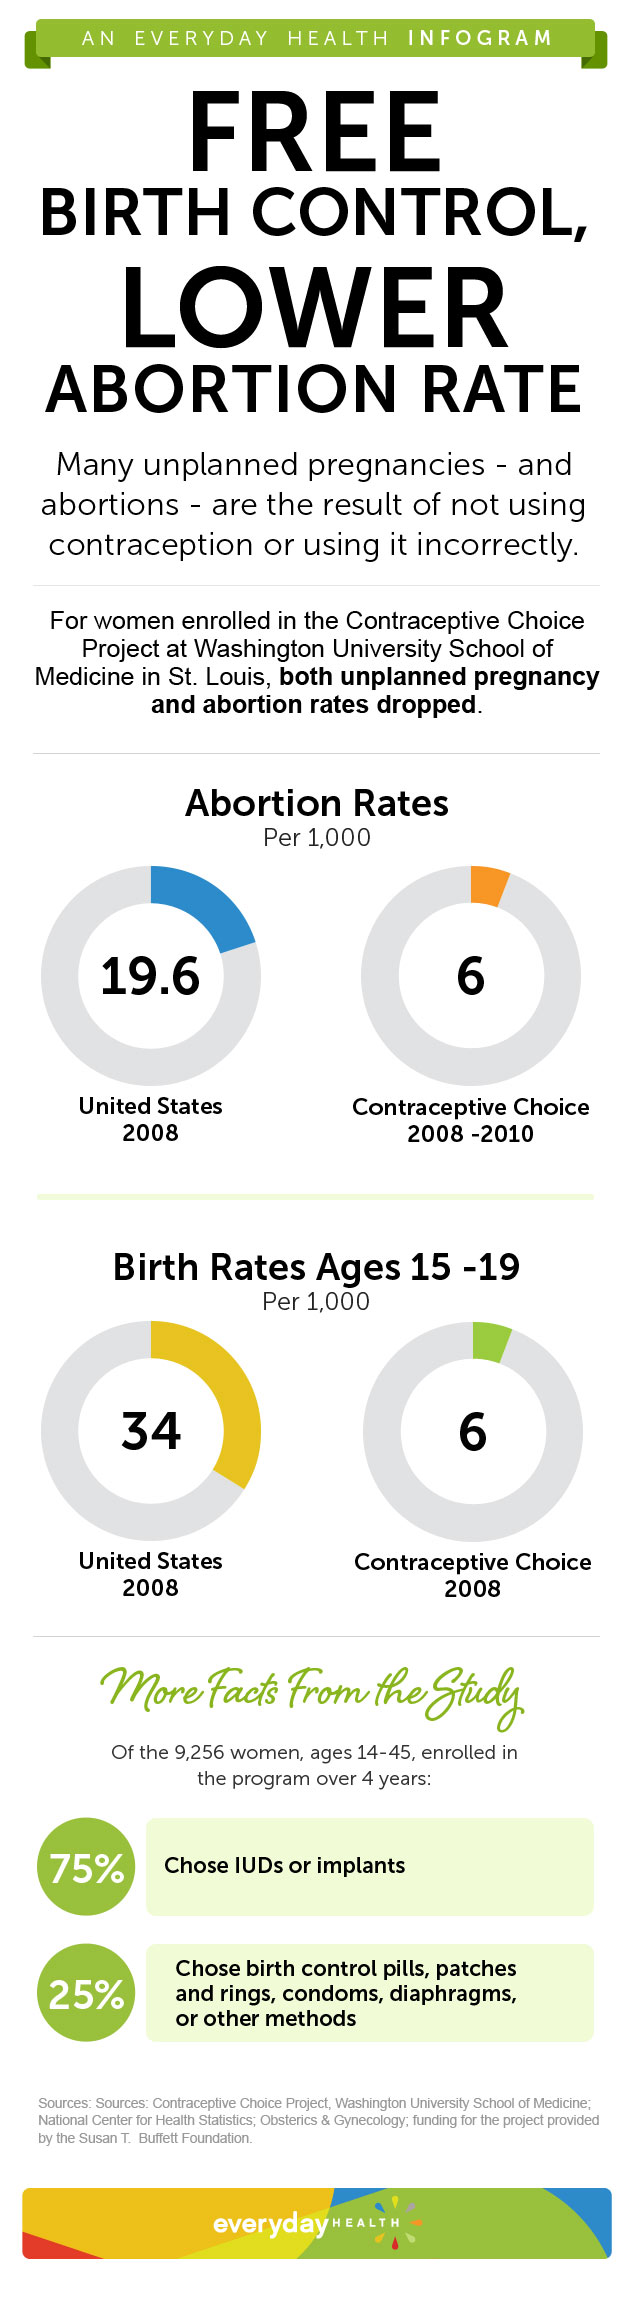 Free birth control, lower abortion rate